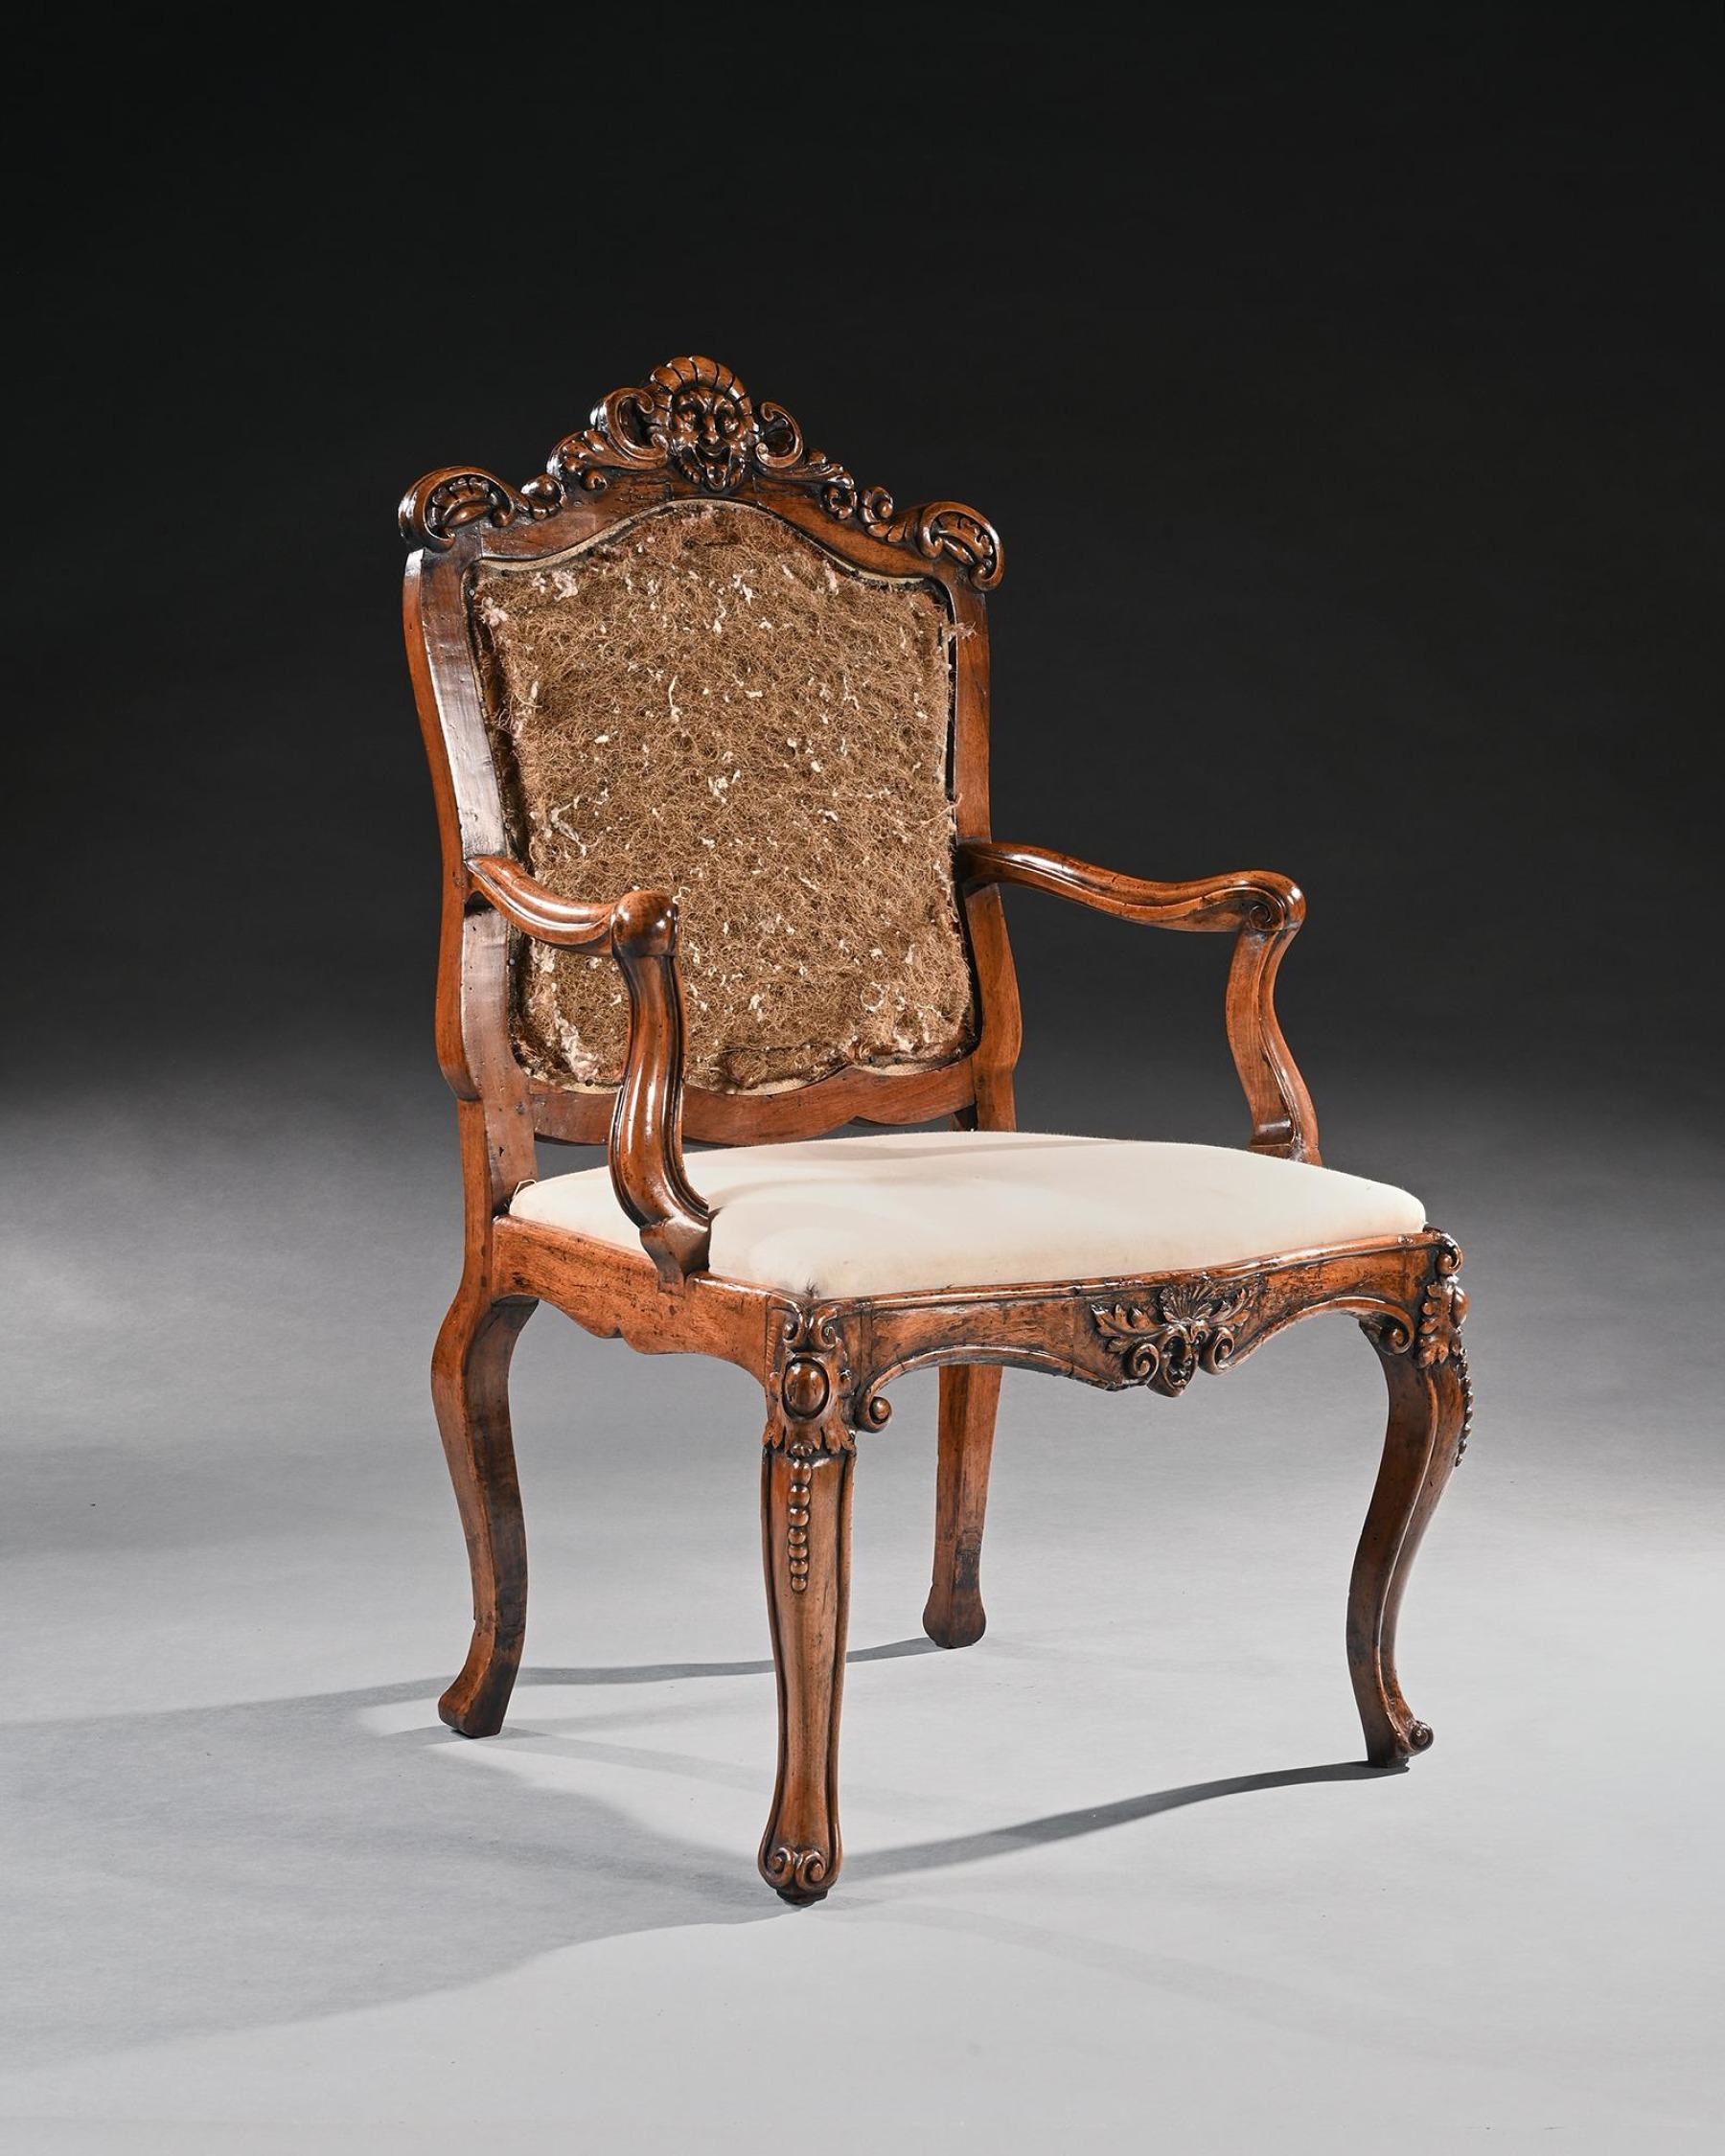 Mid 18th Century Italian Rococo Armchair in Walnut with Extravagantly Carved Head Rail

Italian Circa 1760

This beautiful armchair is executed in walnut and, in its basic form, is highly influenced by the French designs of the Louis XV period which